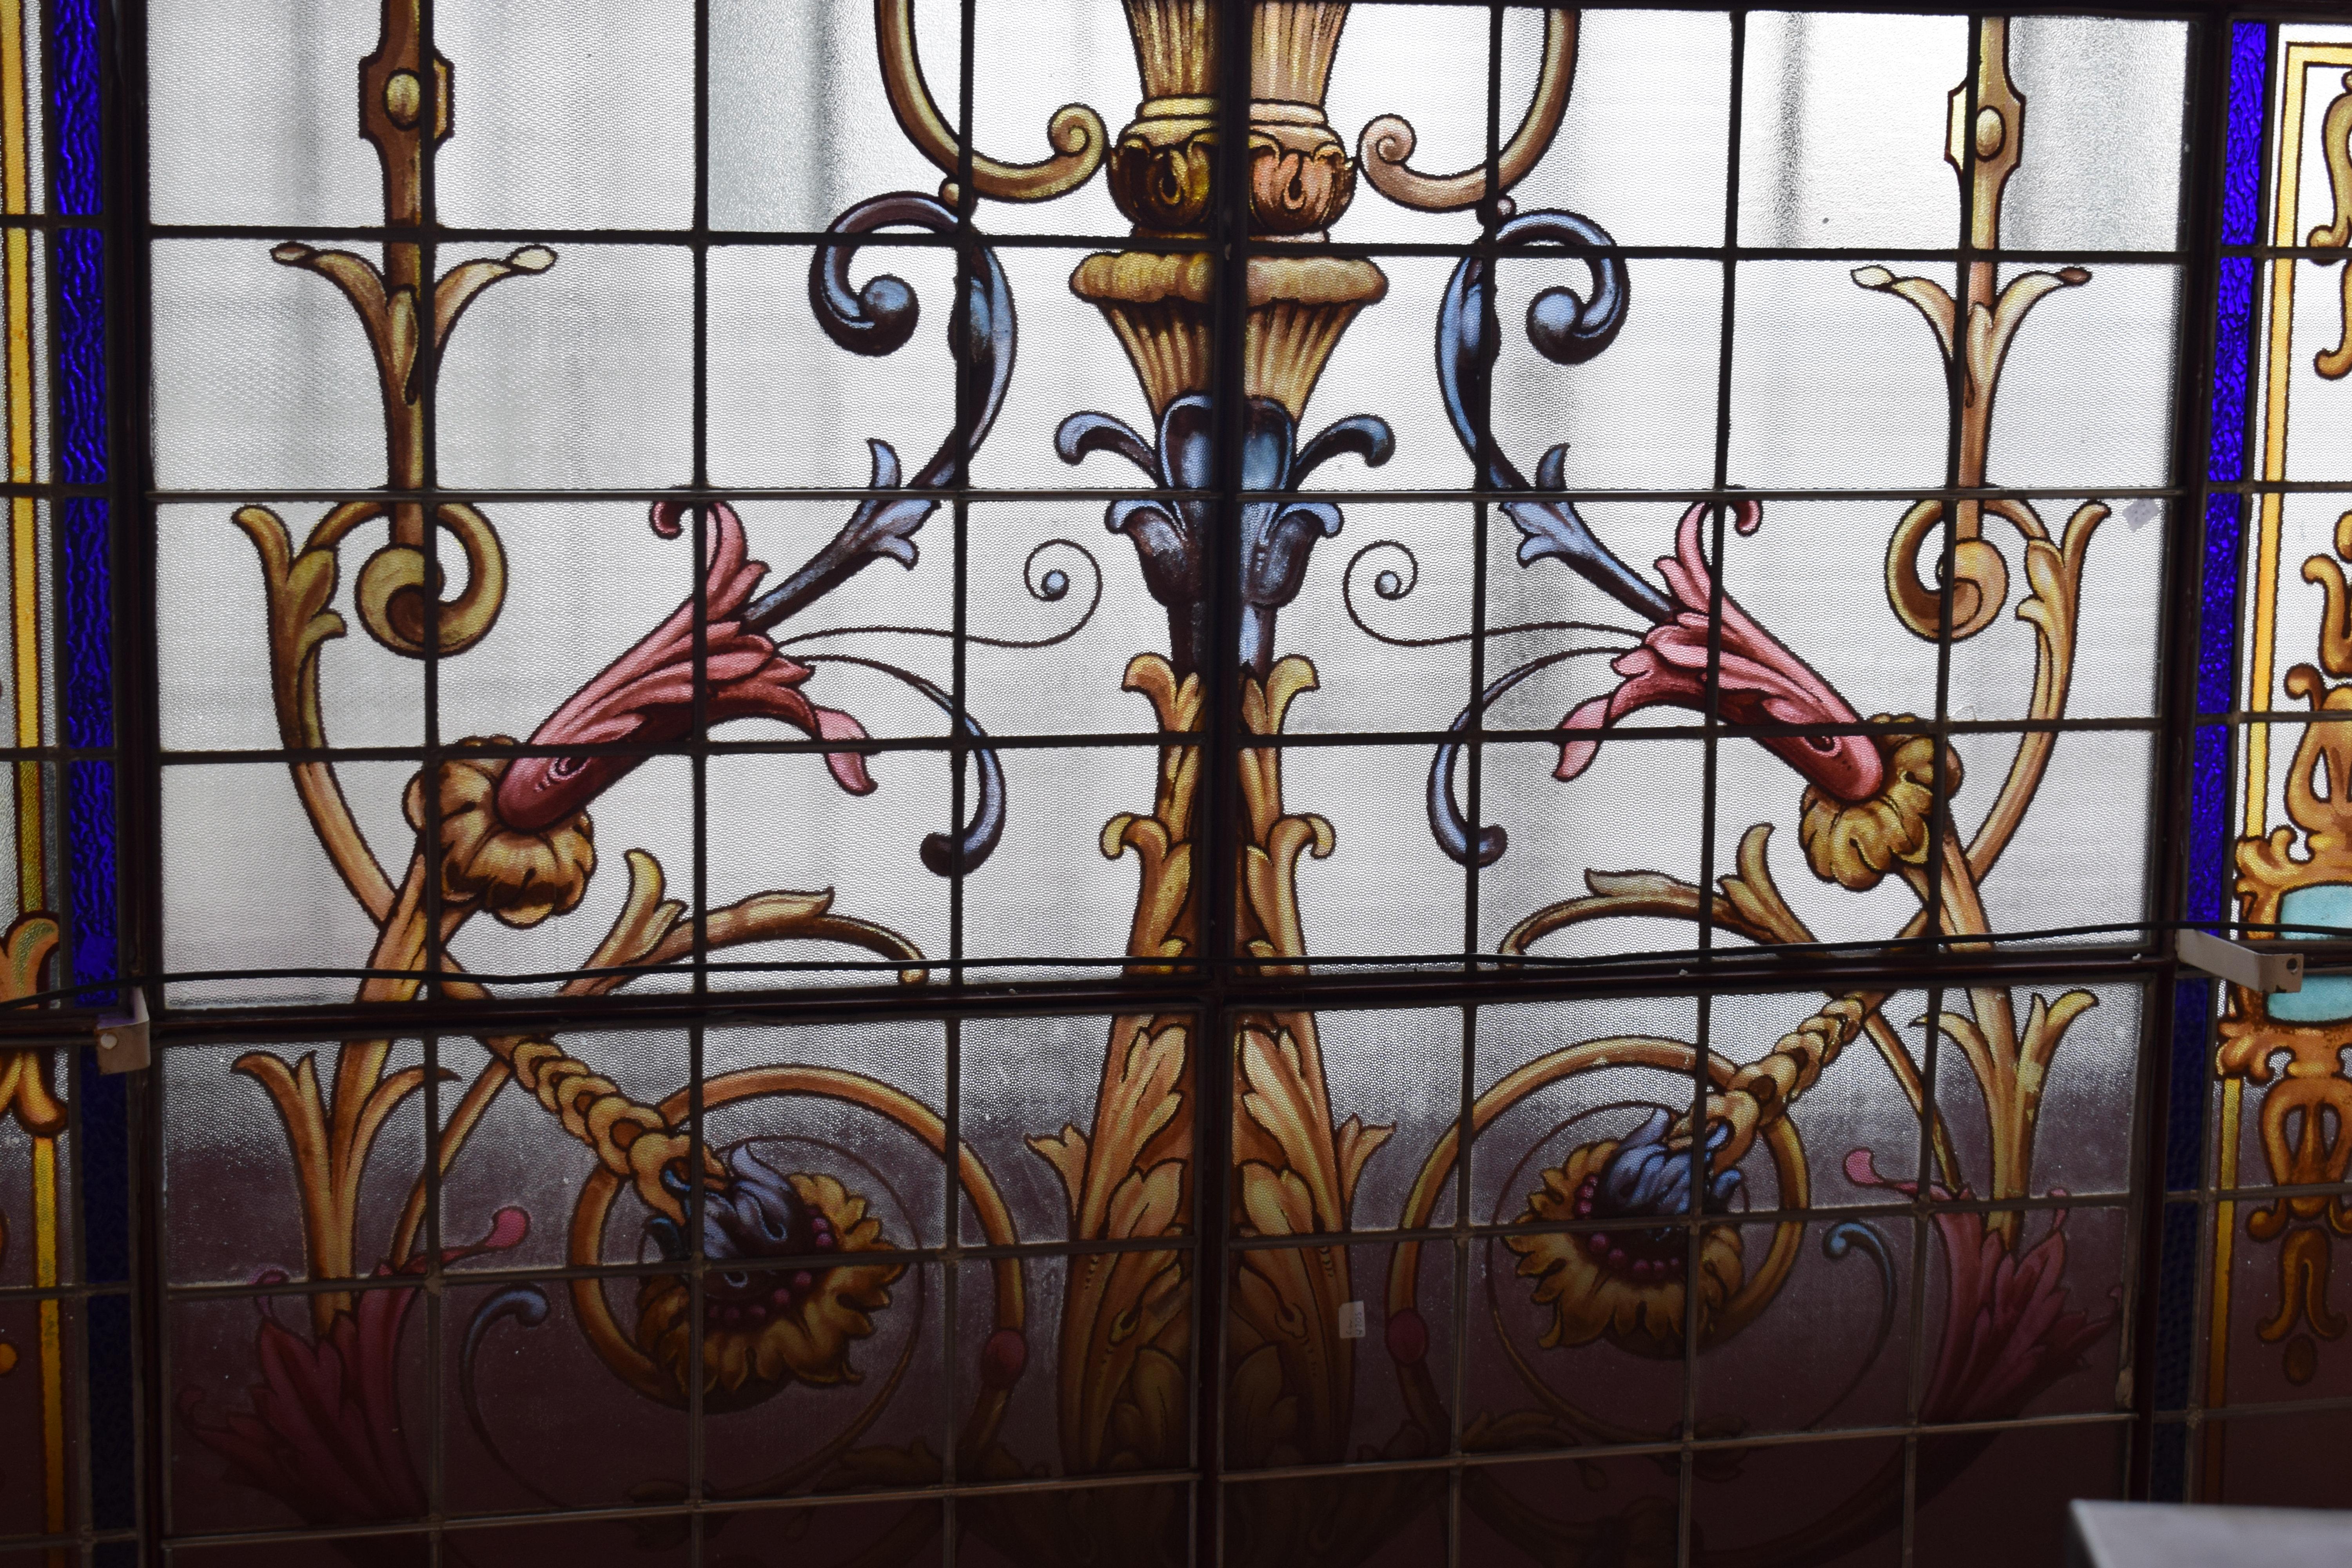 A magnificent late 19th century French Leaded Glass Vitraux Window, depicting flower garlands, flower vase and stylized filigree. 22 panels, all panels recently re-leaded, therefore they are strong and rigid. Iron Frame recently painted, in good